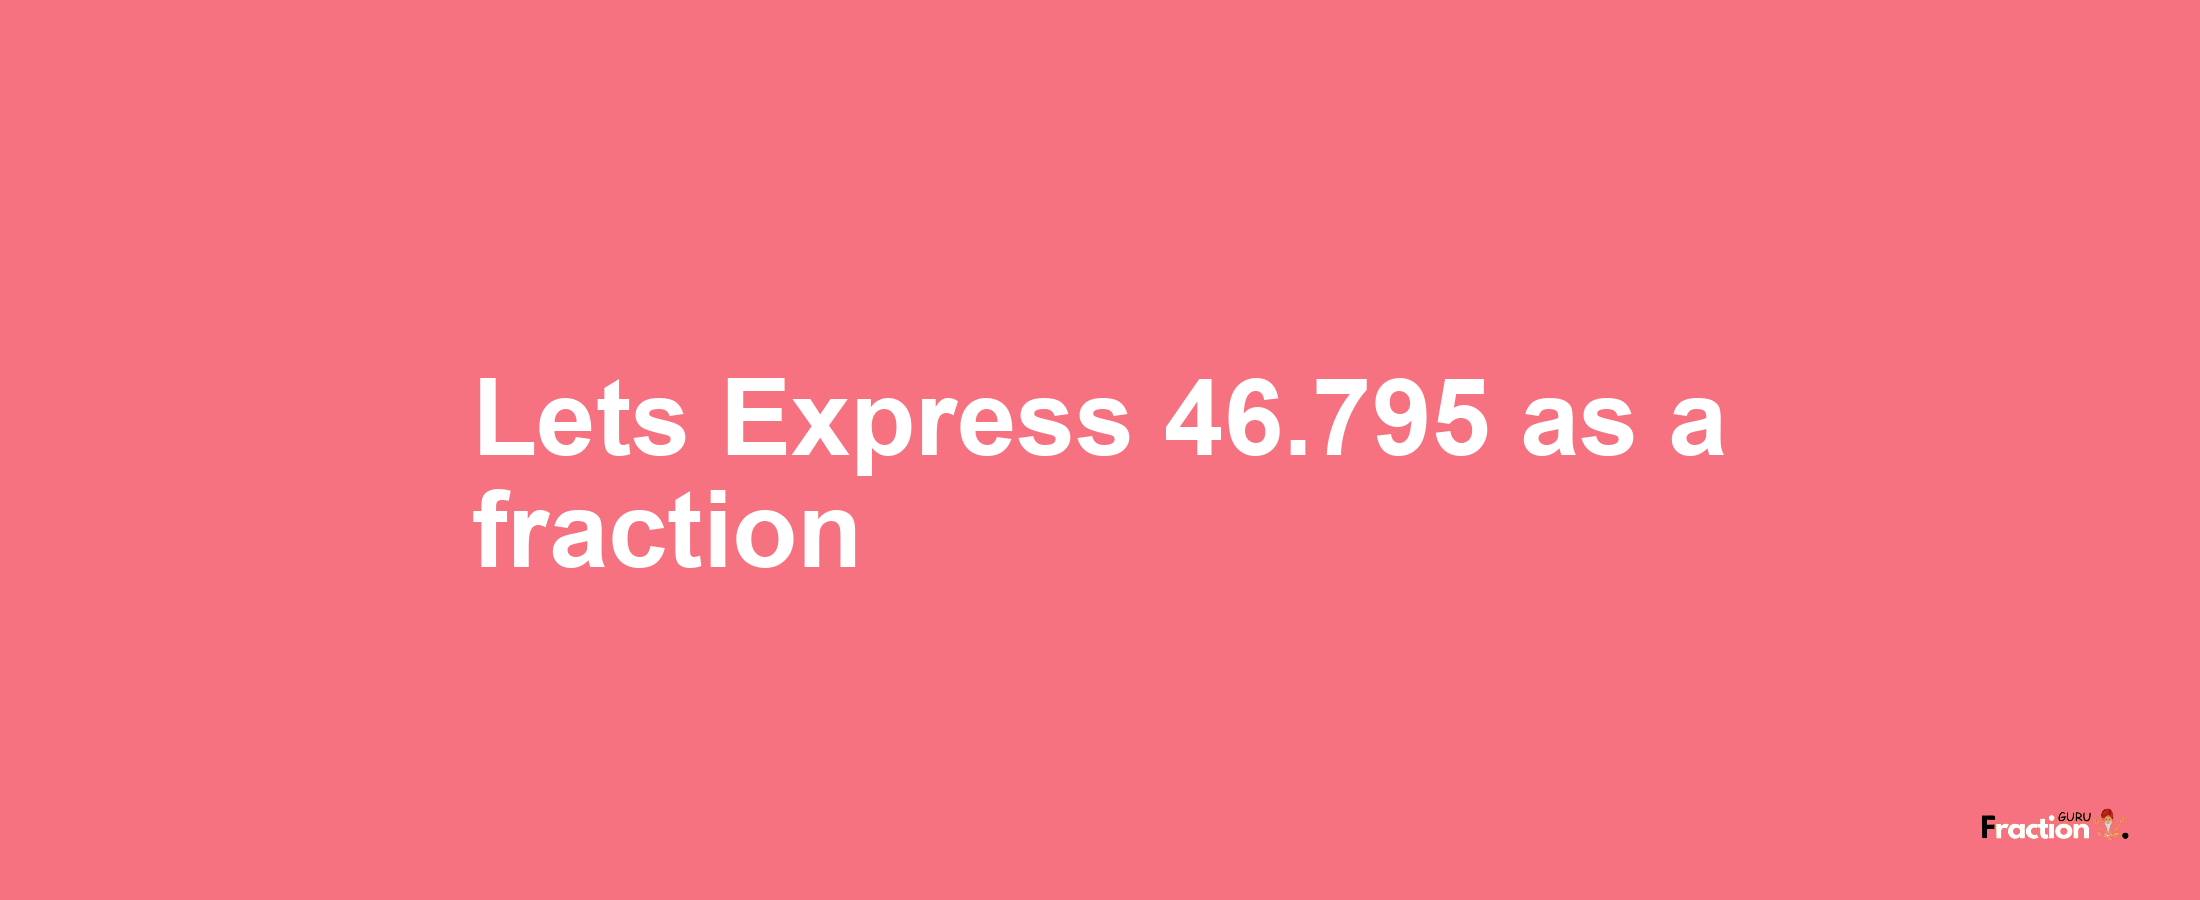 Lets Express 46.795 as afraction